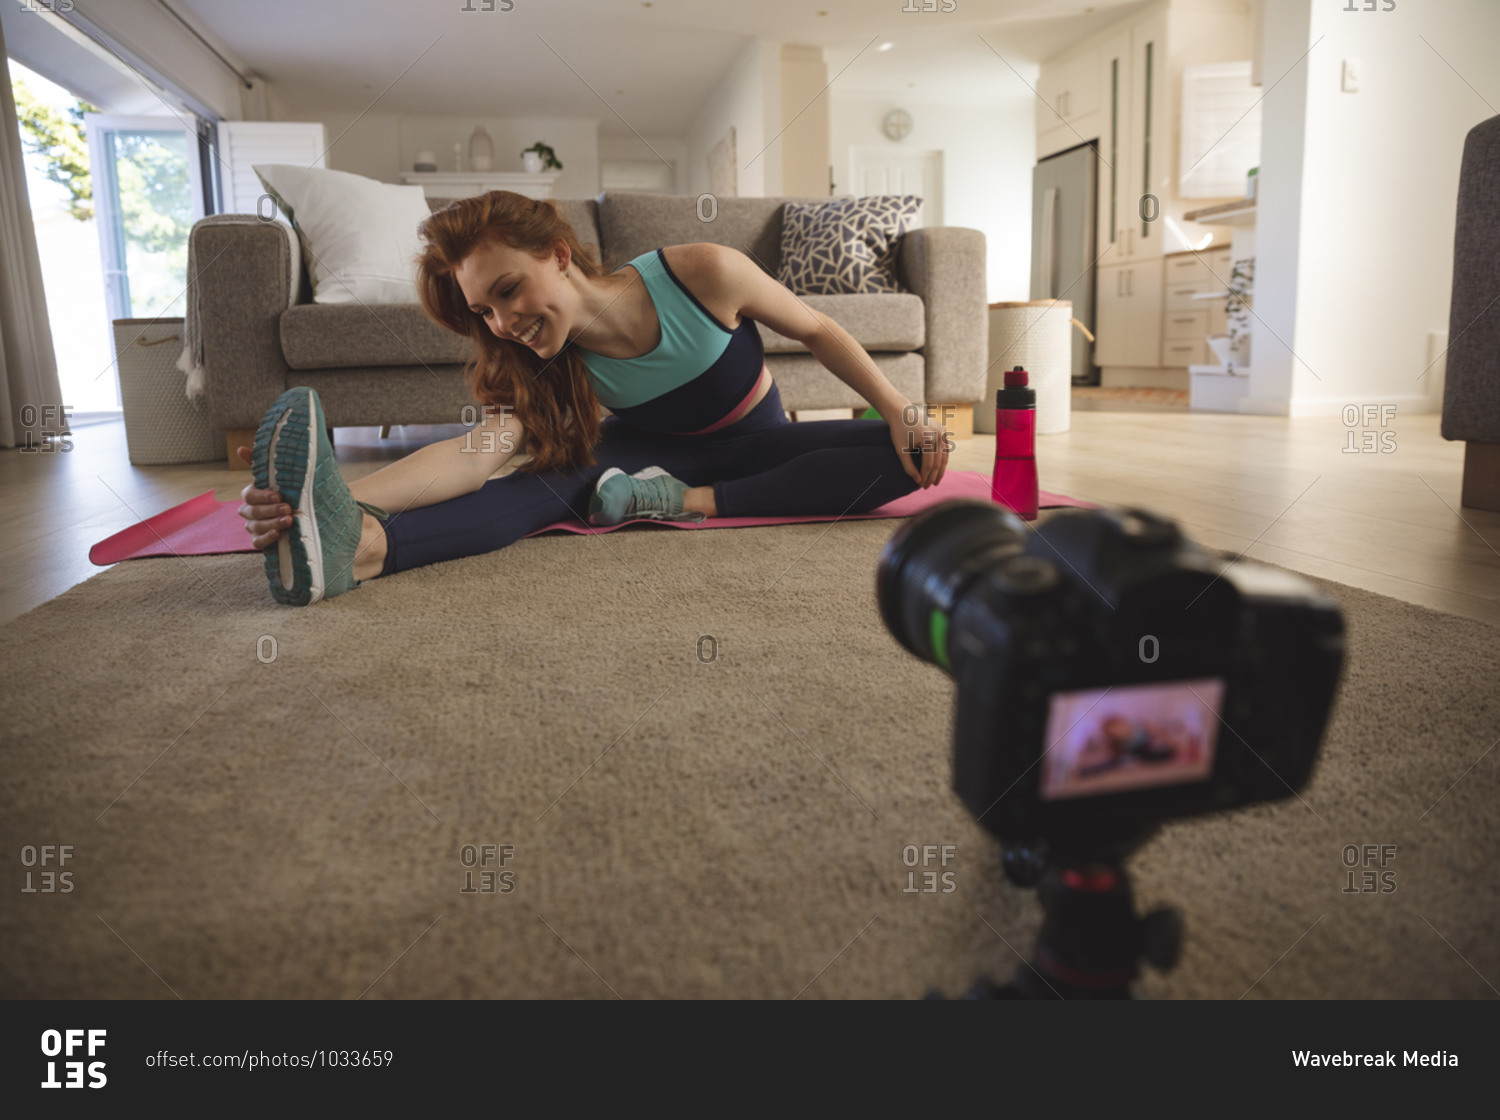 Caucasian woman spending time at home, in living room, exercising, stretching and recording it with a camera. Social distancing during Covid 19 Coronavirus quarantine lockdown.